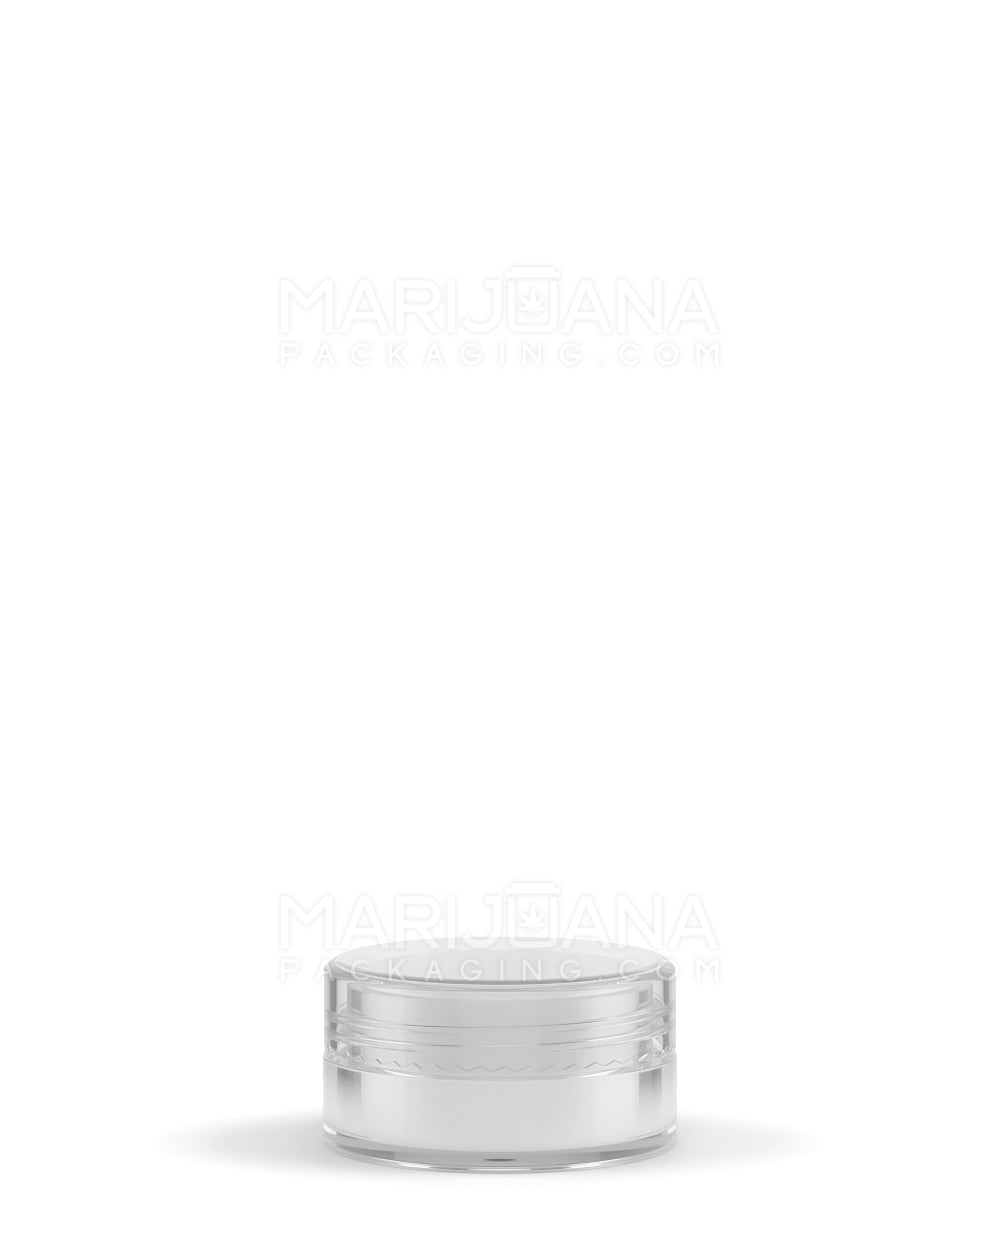 Clear Concentrate Containers w/ Screw Top Cap & White Silicone Insert | 5mL - Plastic - 100 Count - 2